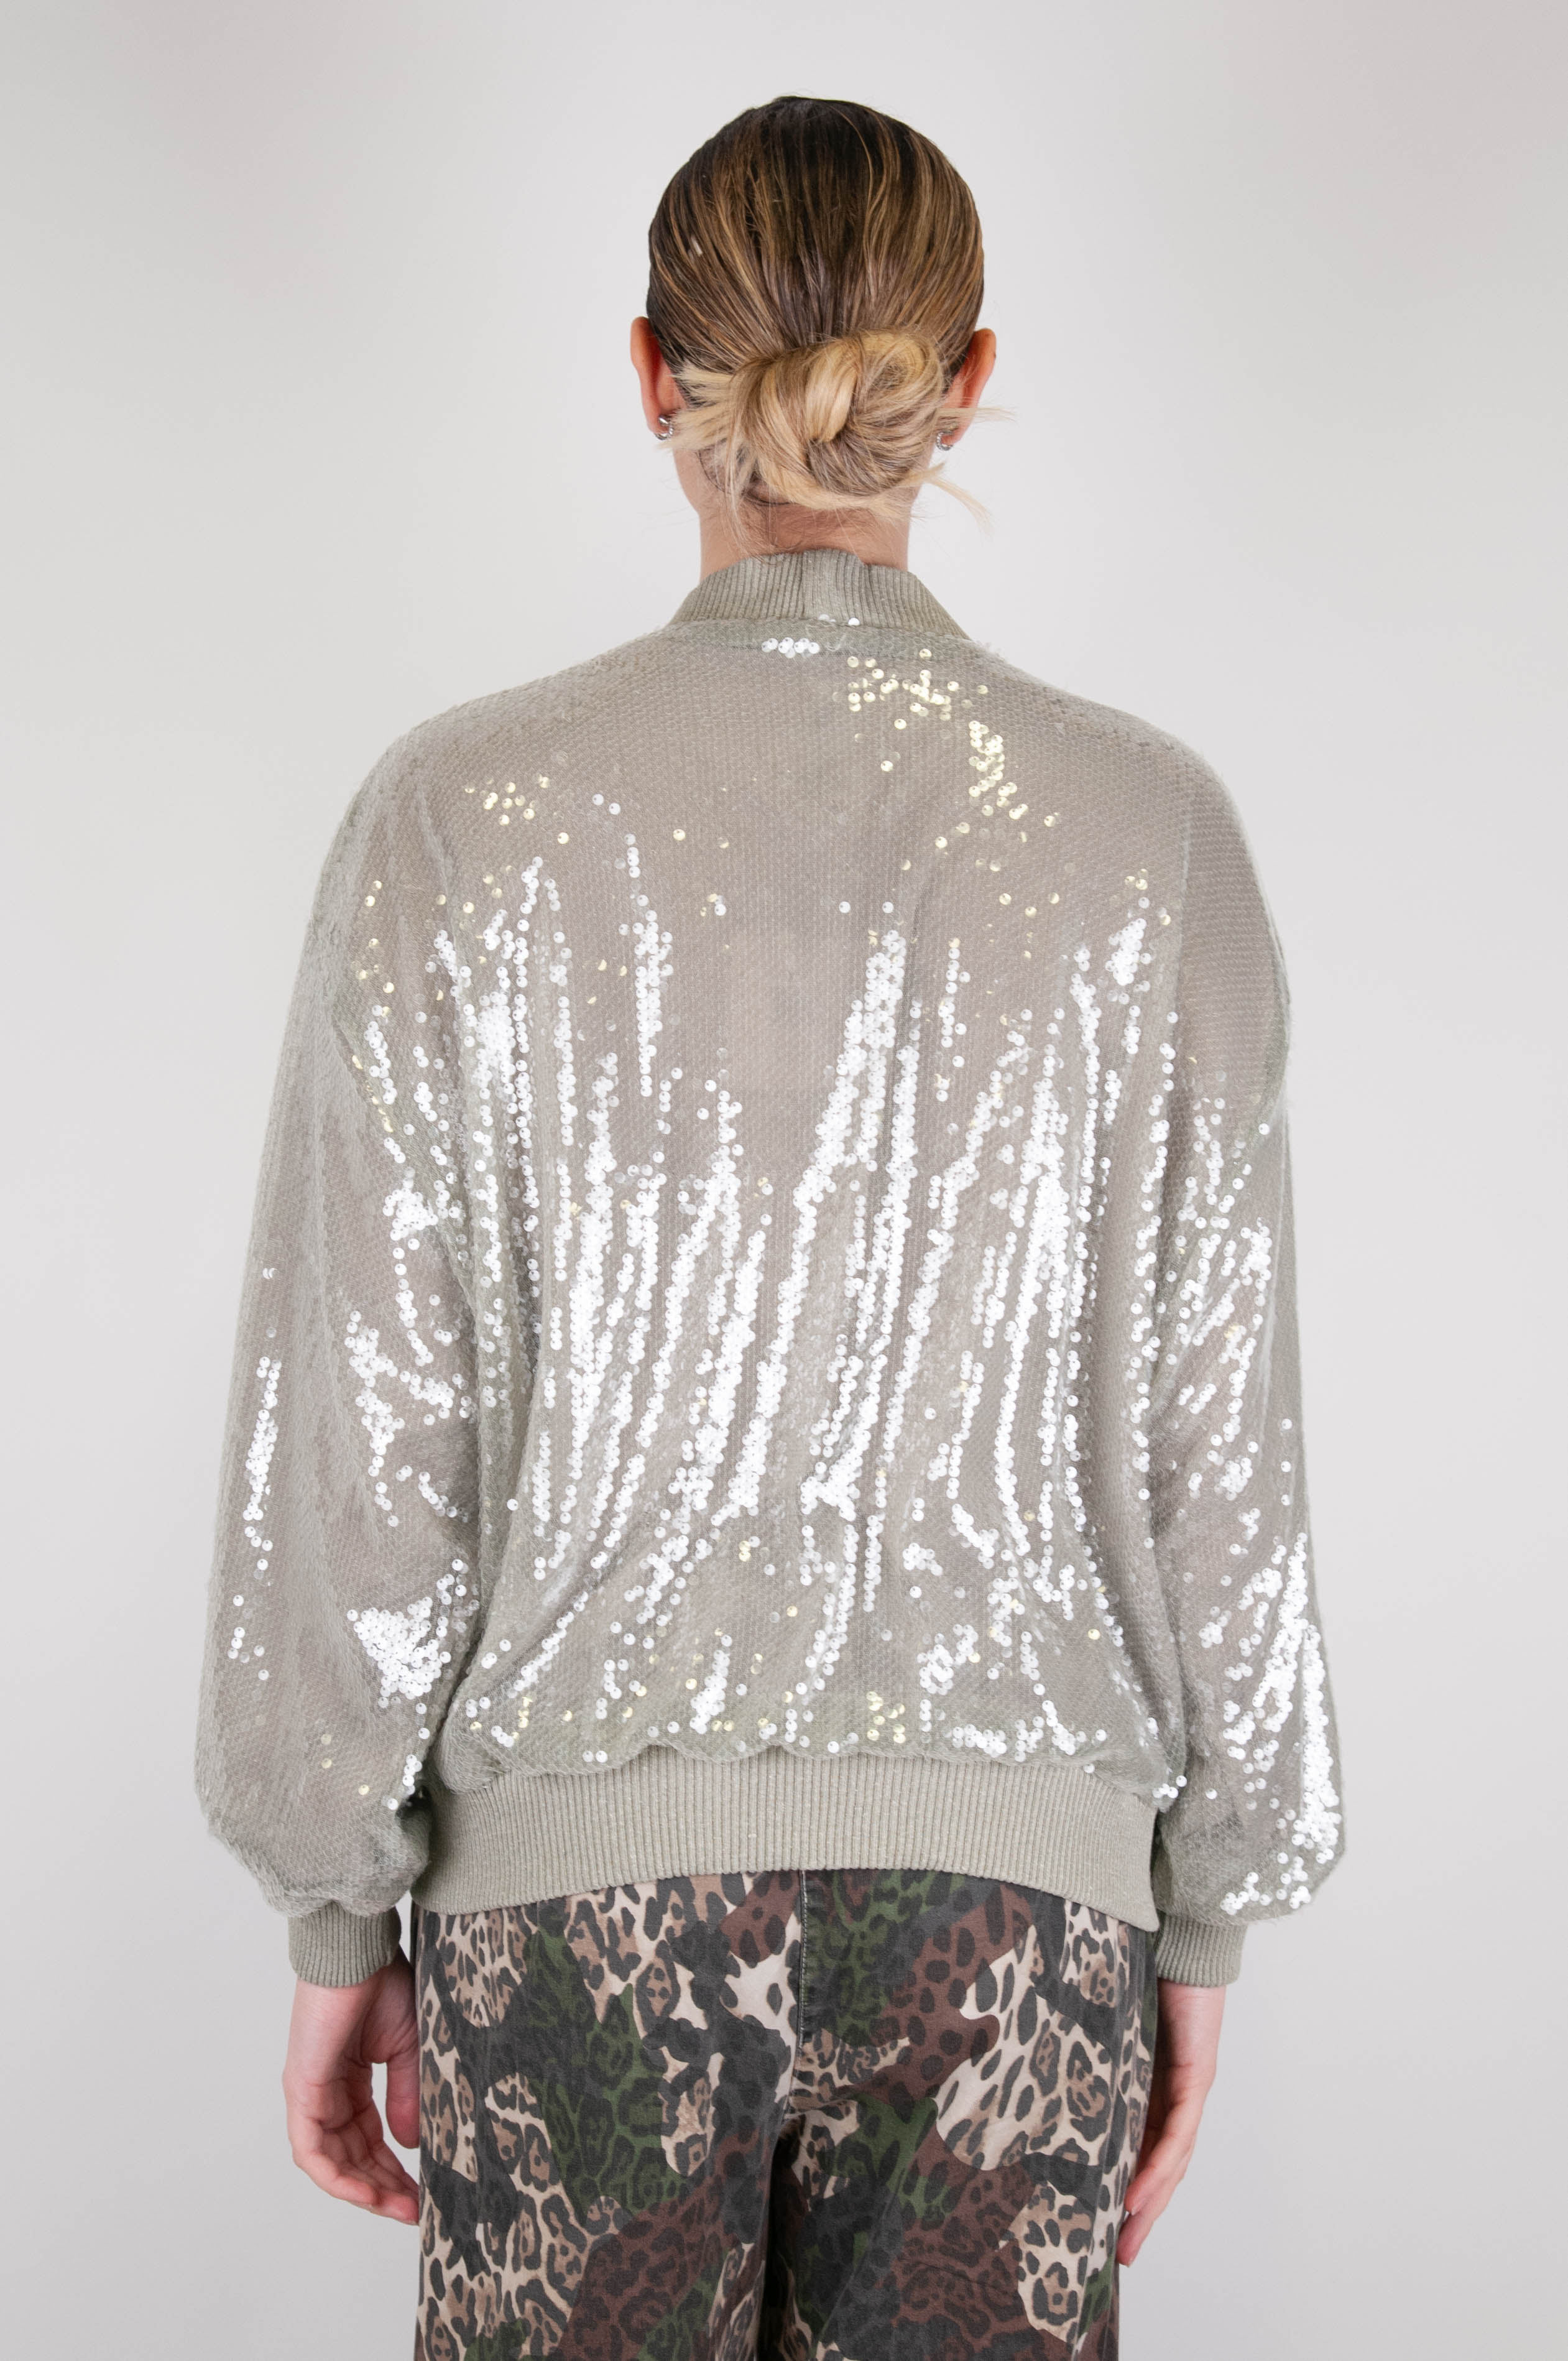 Tensione in - Giacca bomber paillettes